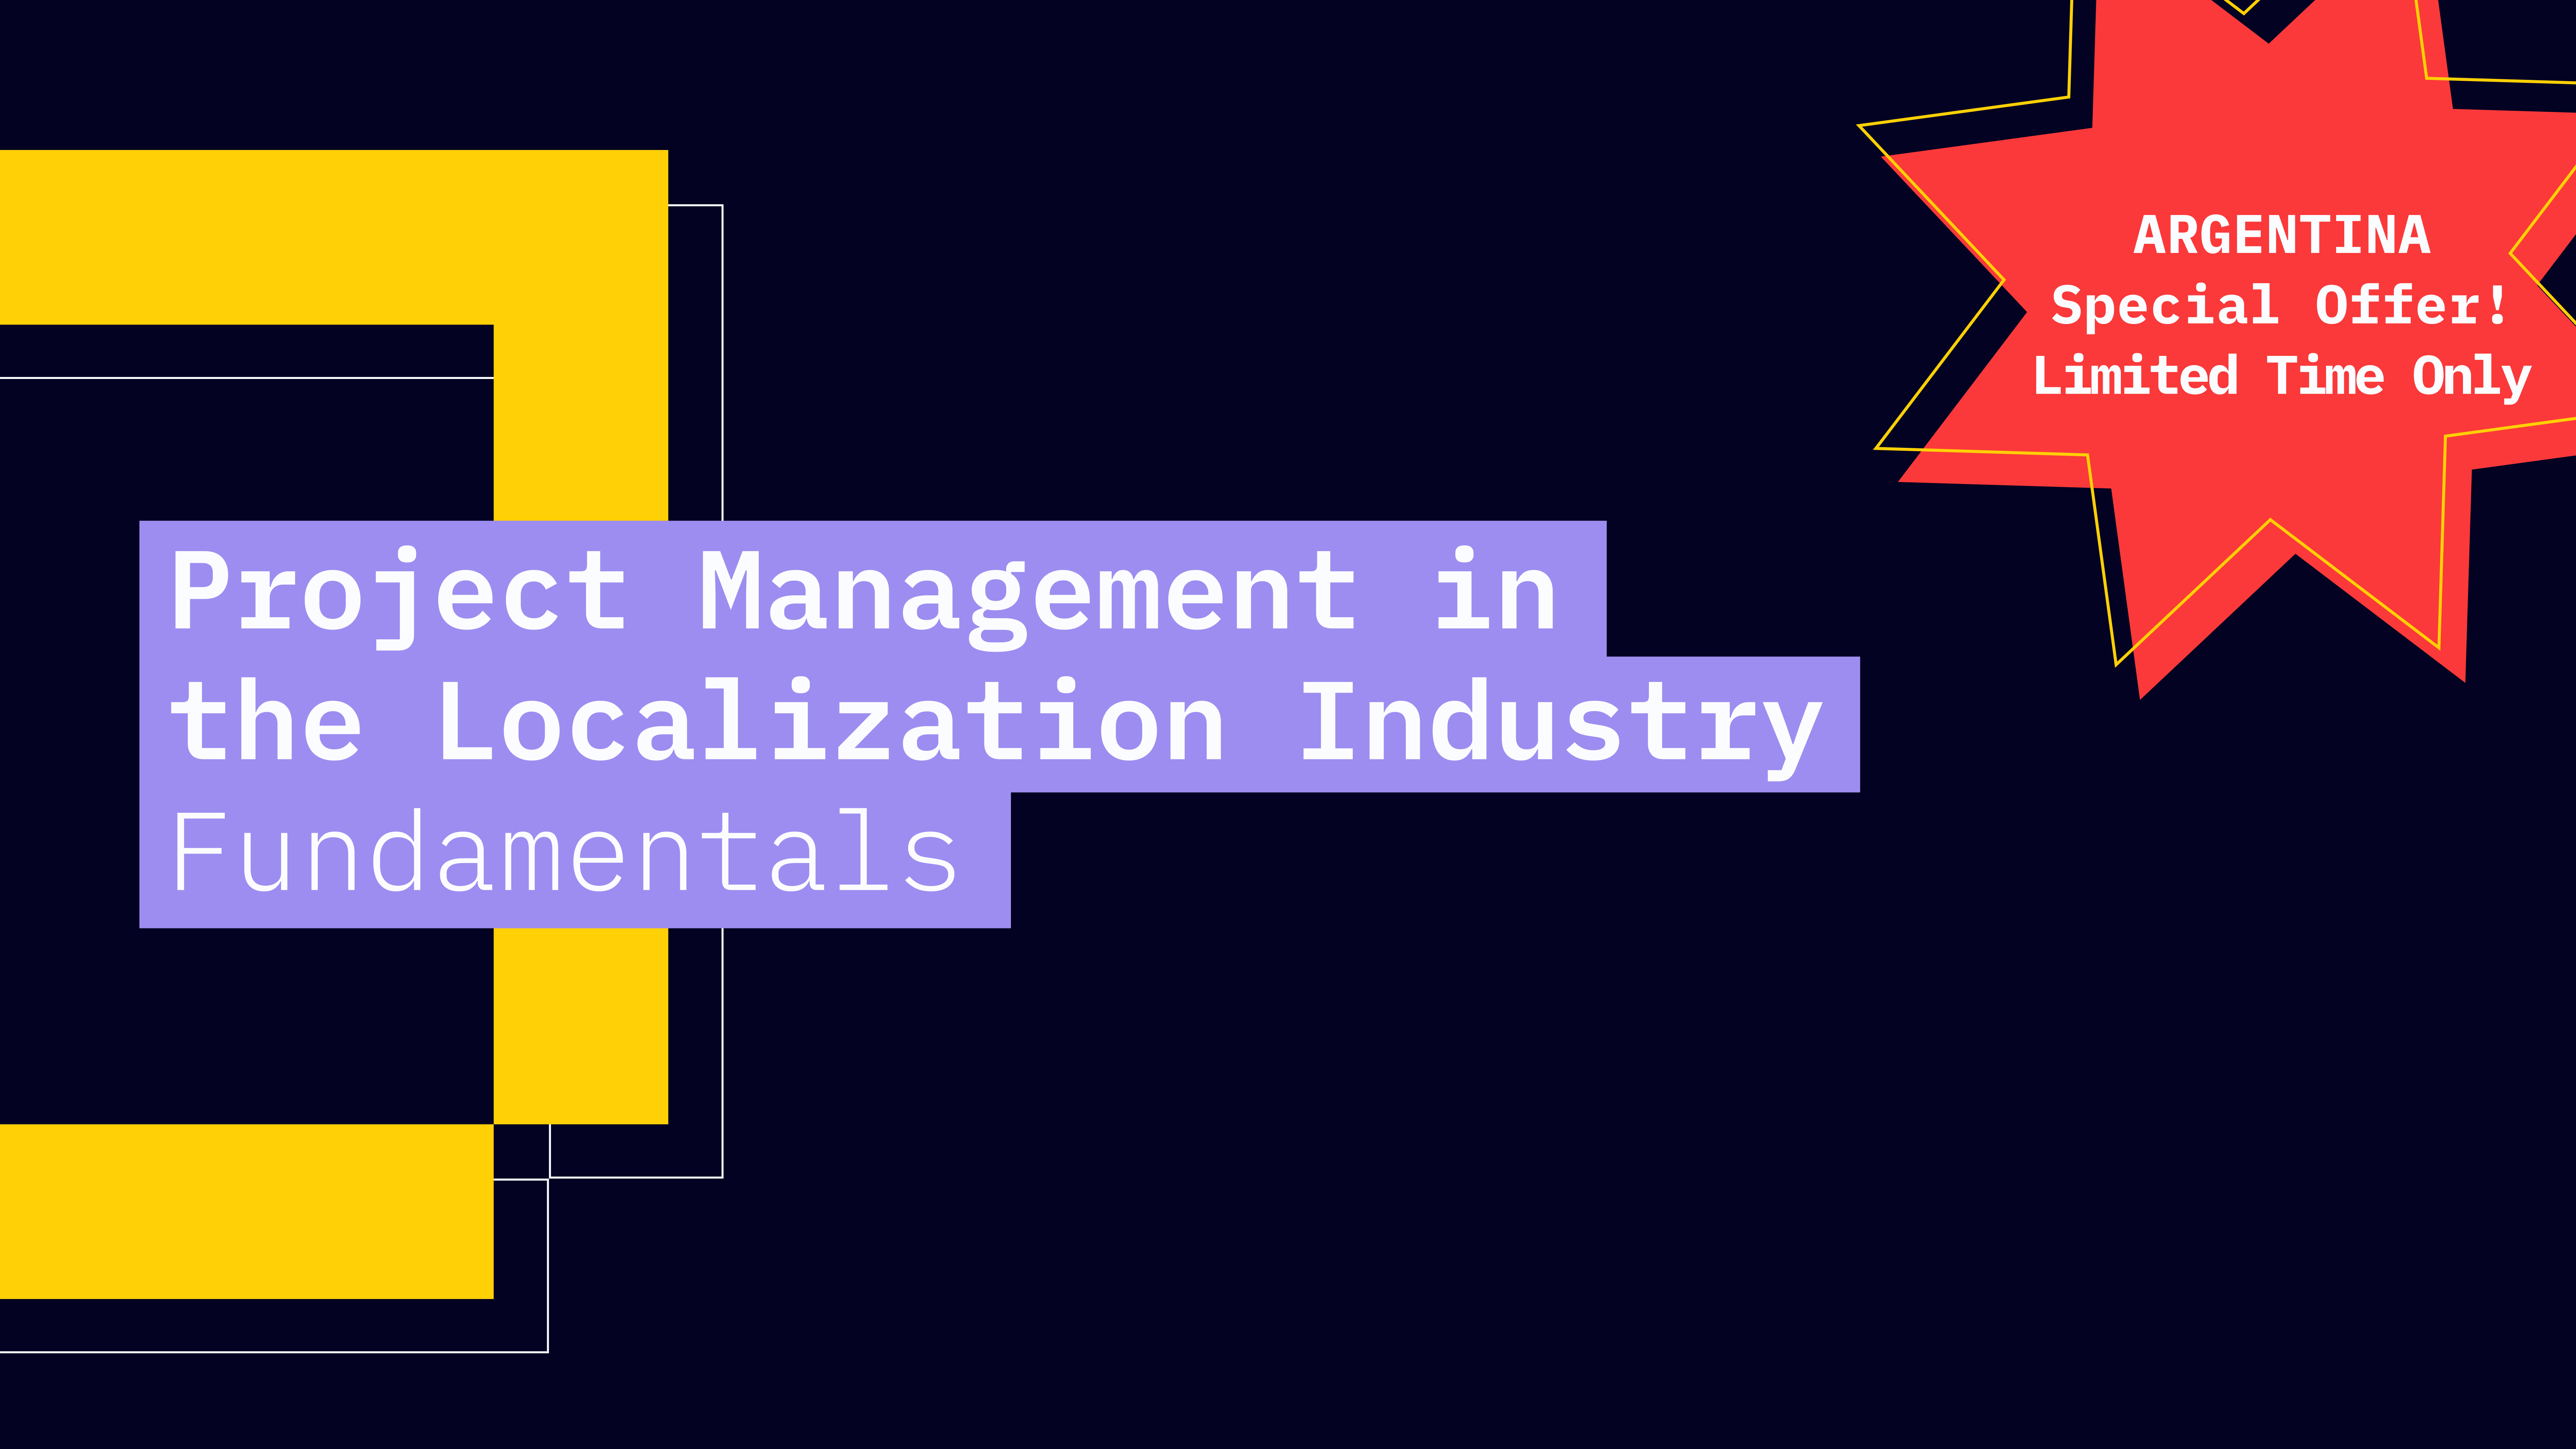 Project Management in the Localization Industry: Fundamentals (Argentina)